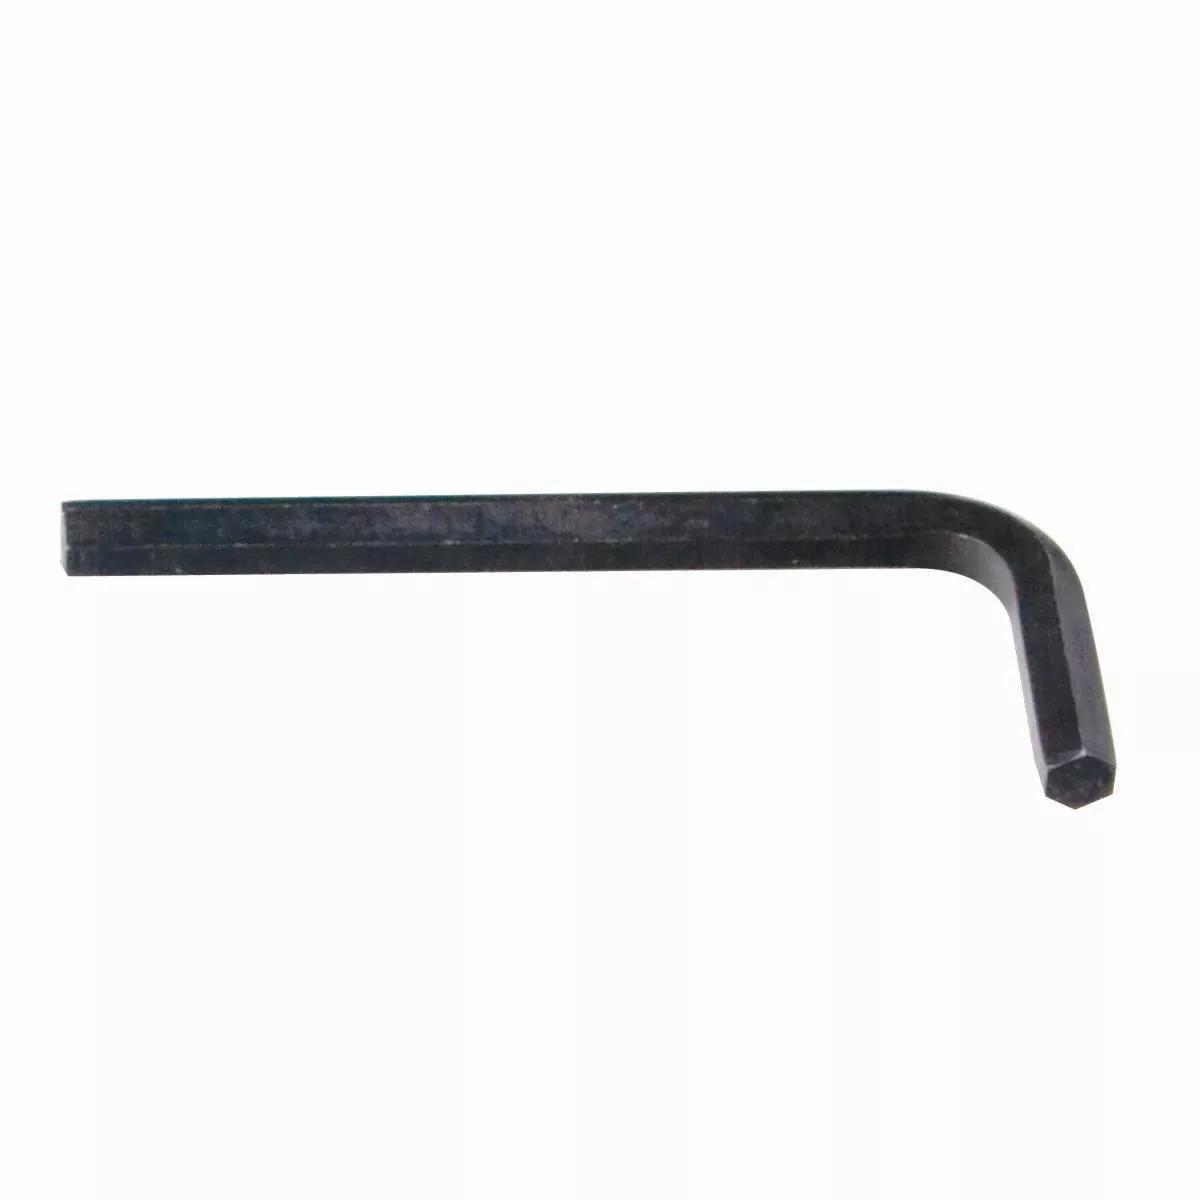 3/32" Long Arm Hex Key Wrench